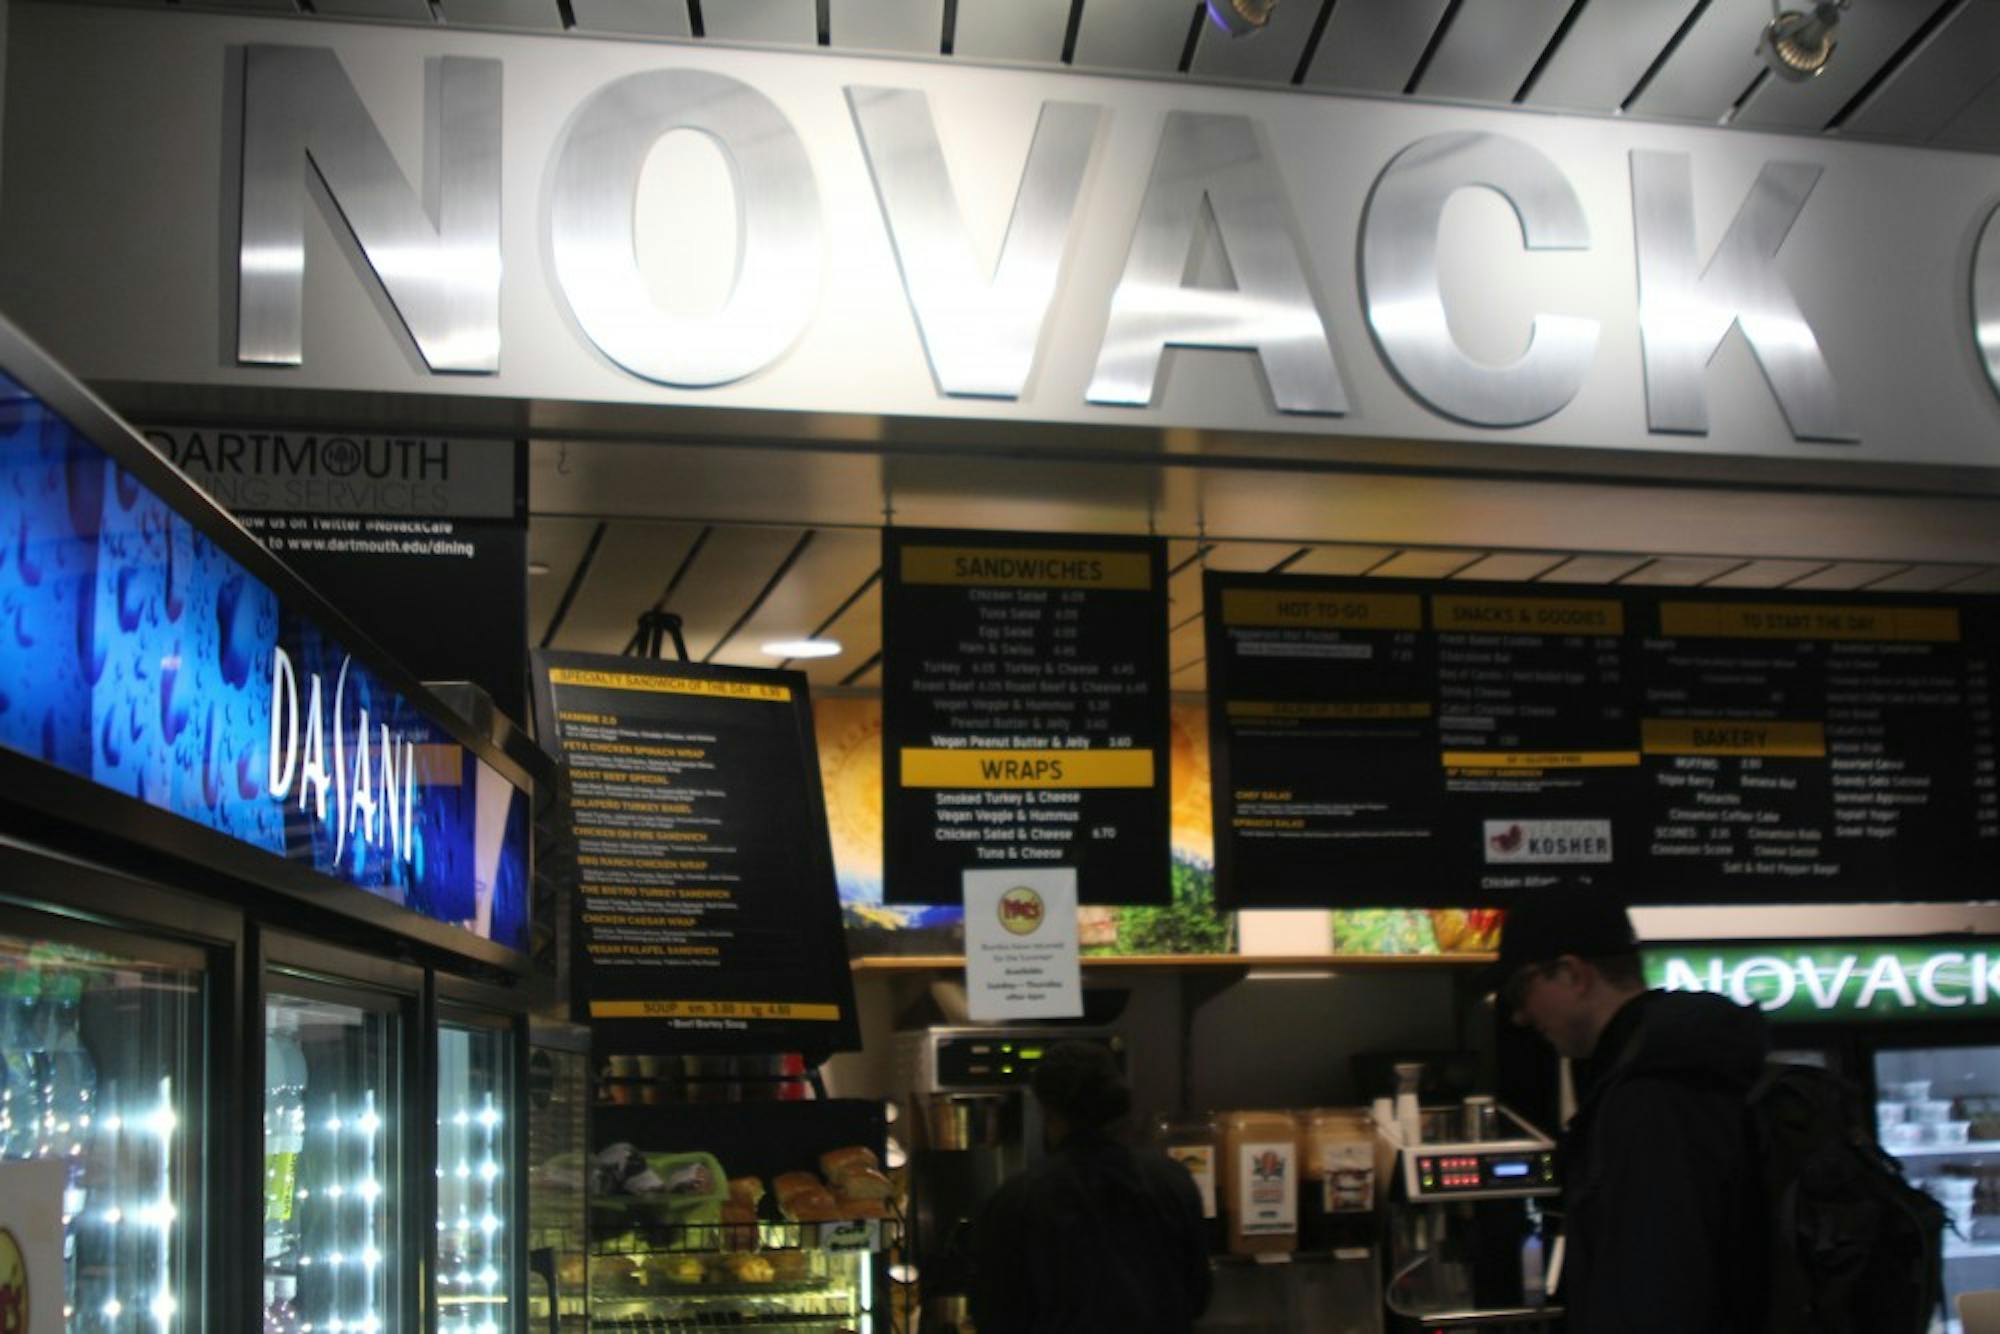 Novack Café, is located in the back of the library and is often open at late hours.&nbsp;